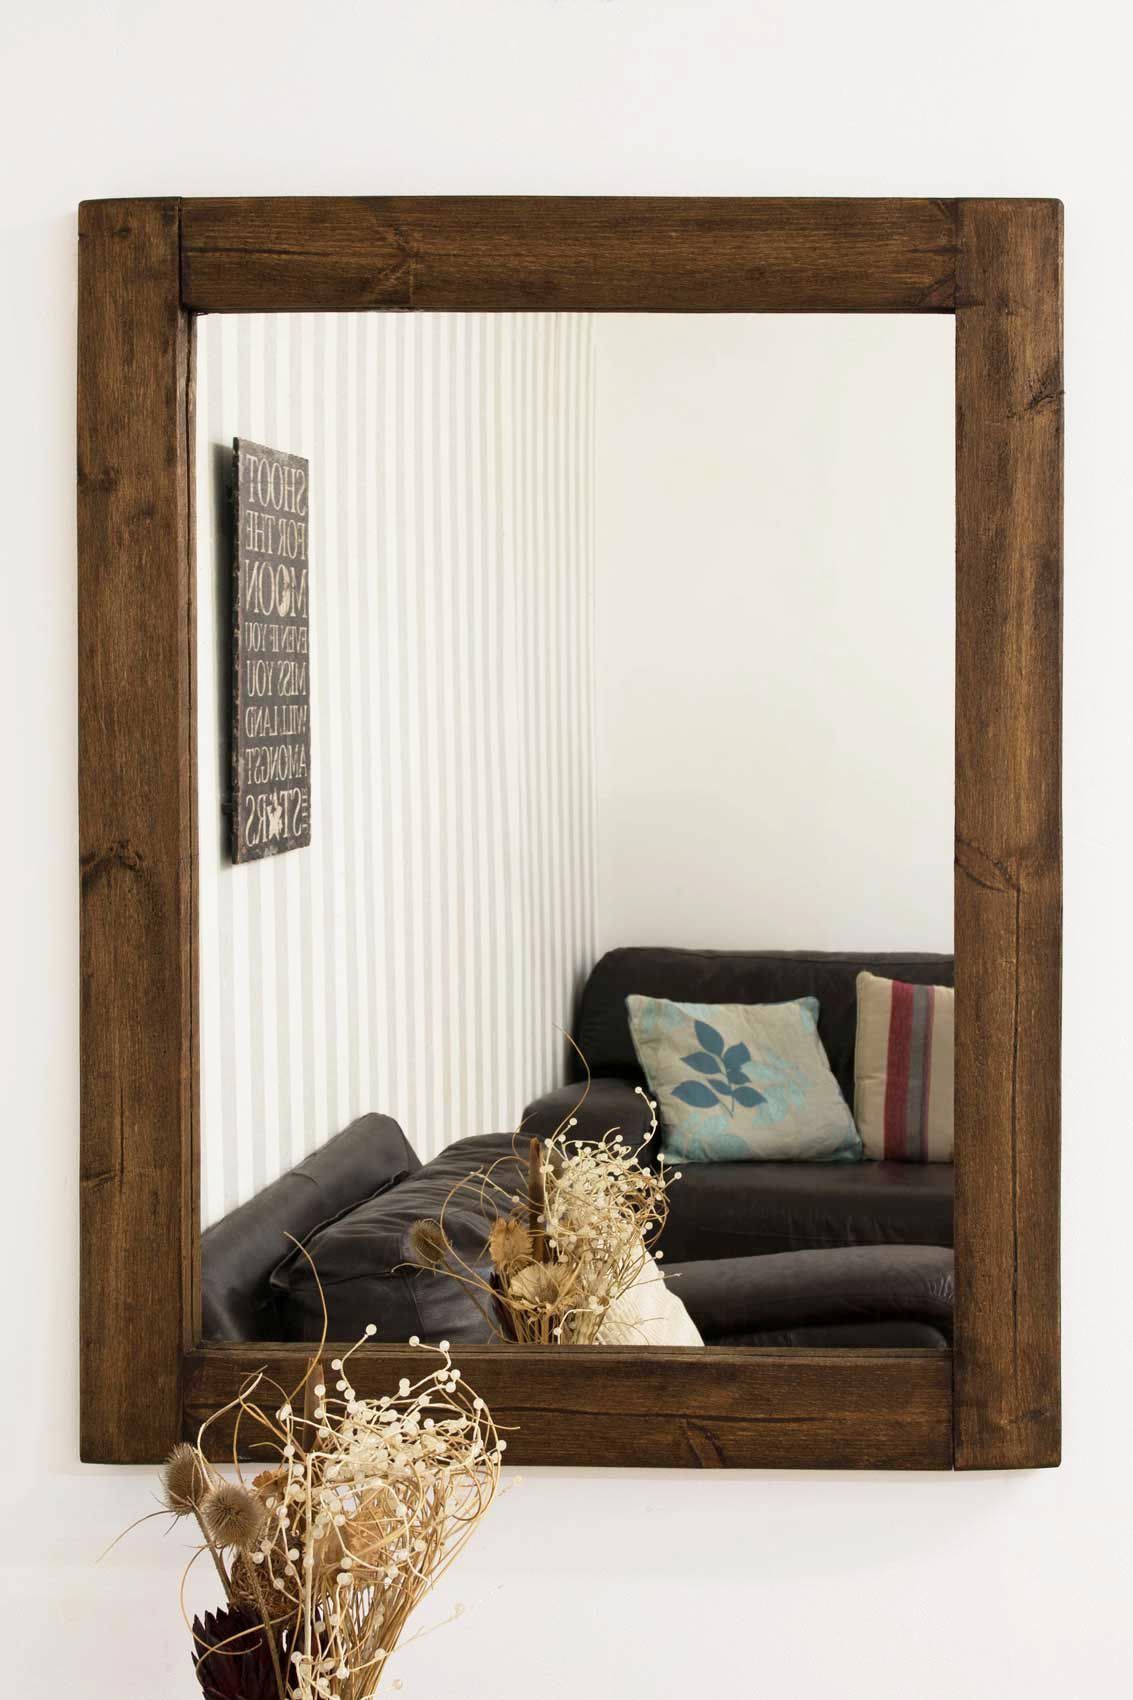 Madrid Rustic Wooden Wall Mirror 30x40 – Ayers And Graces Intended For Rustic Getaway Wood Wall Mirrors (View 13 of 15)